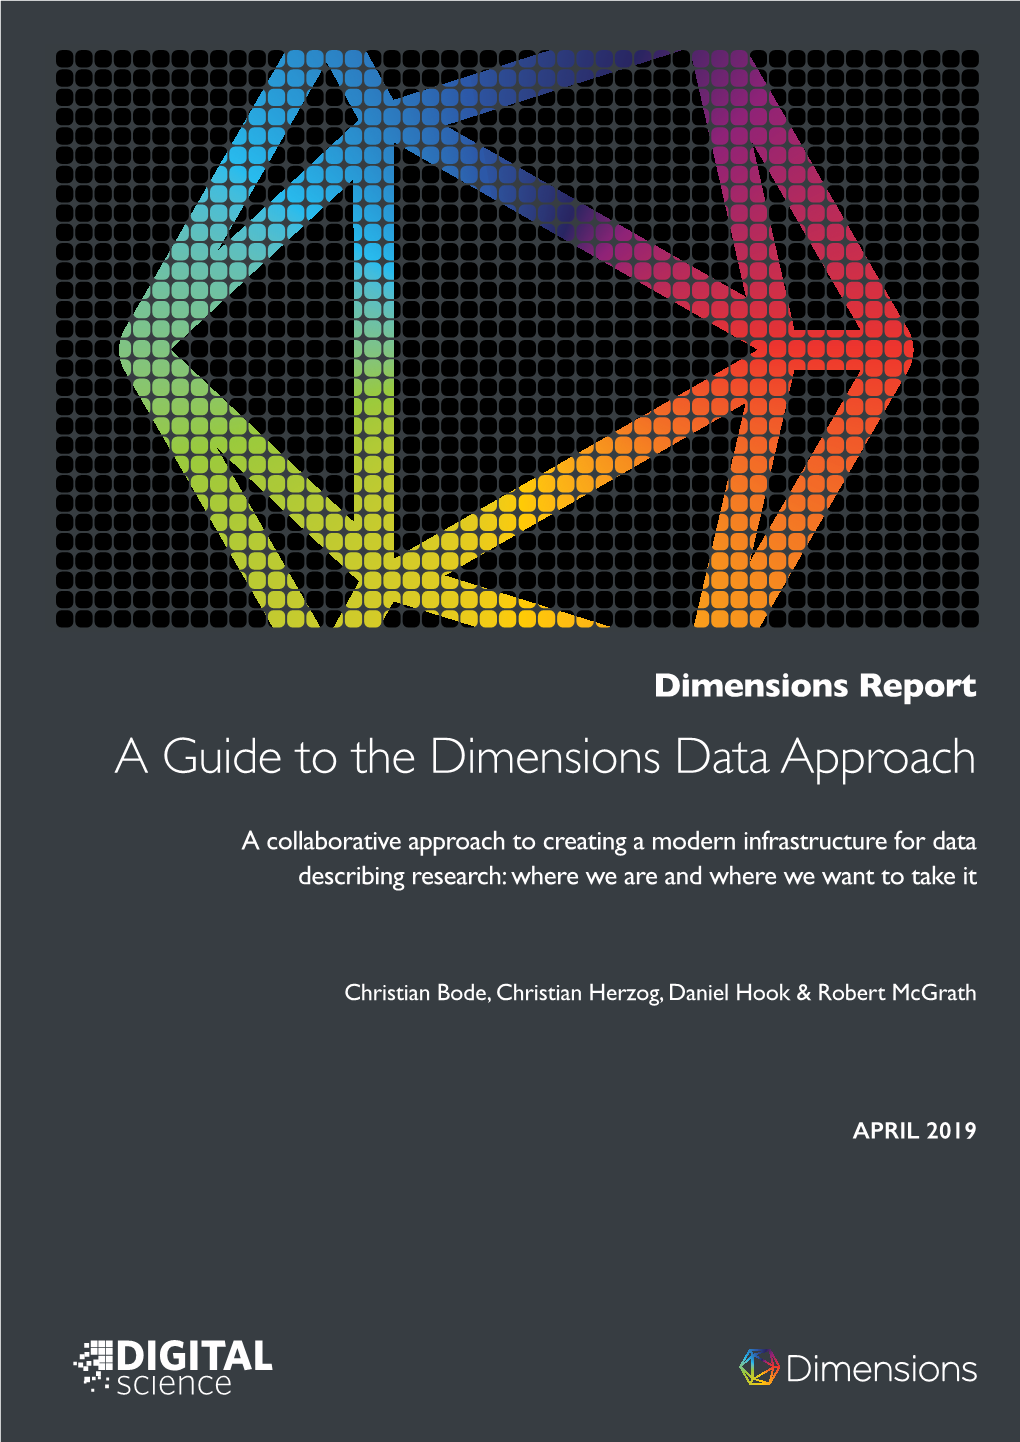 A Guide to the Dimensions Data Approach